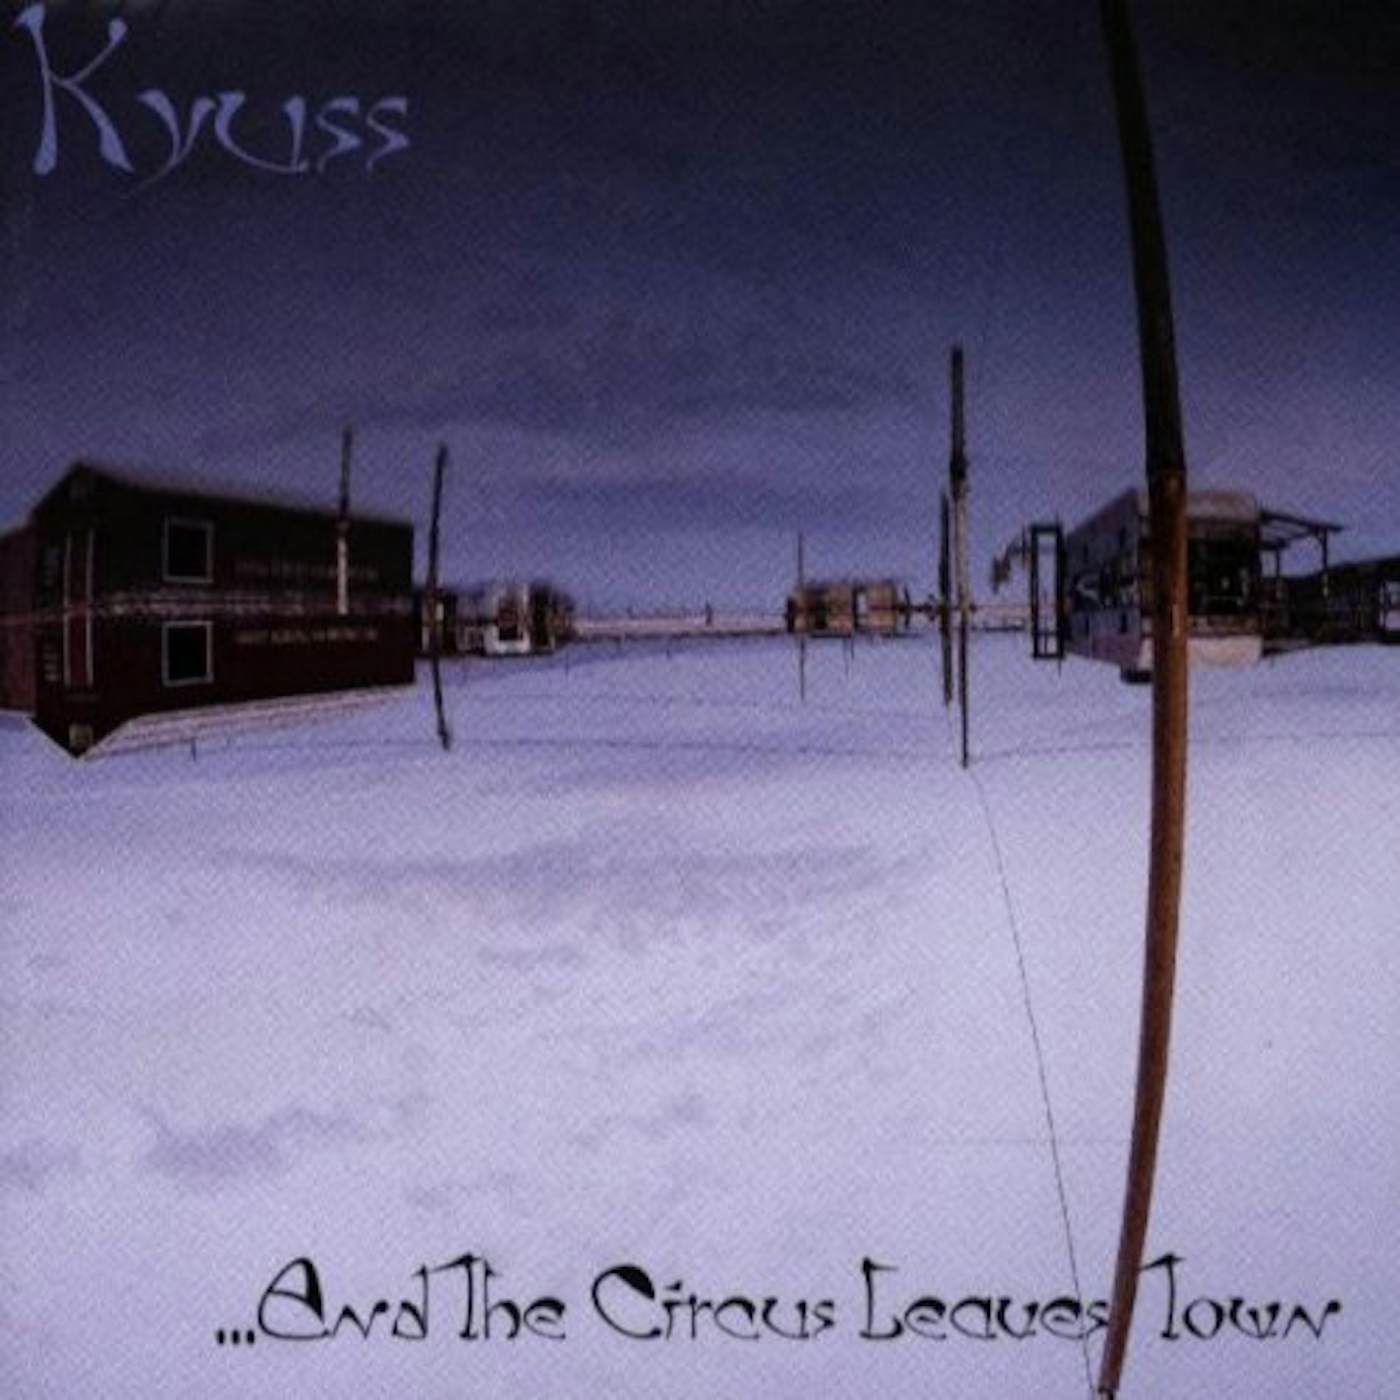 Kyuss AND THE CIRCUS LEAVES TOW Vinyl Record